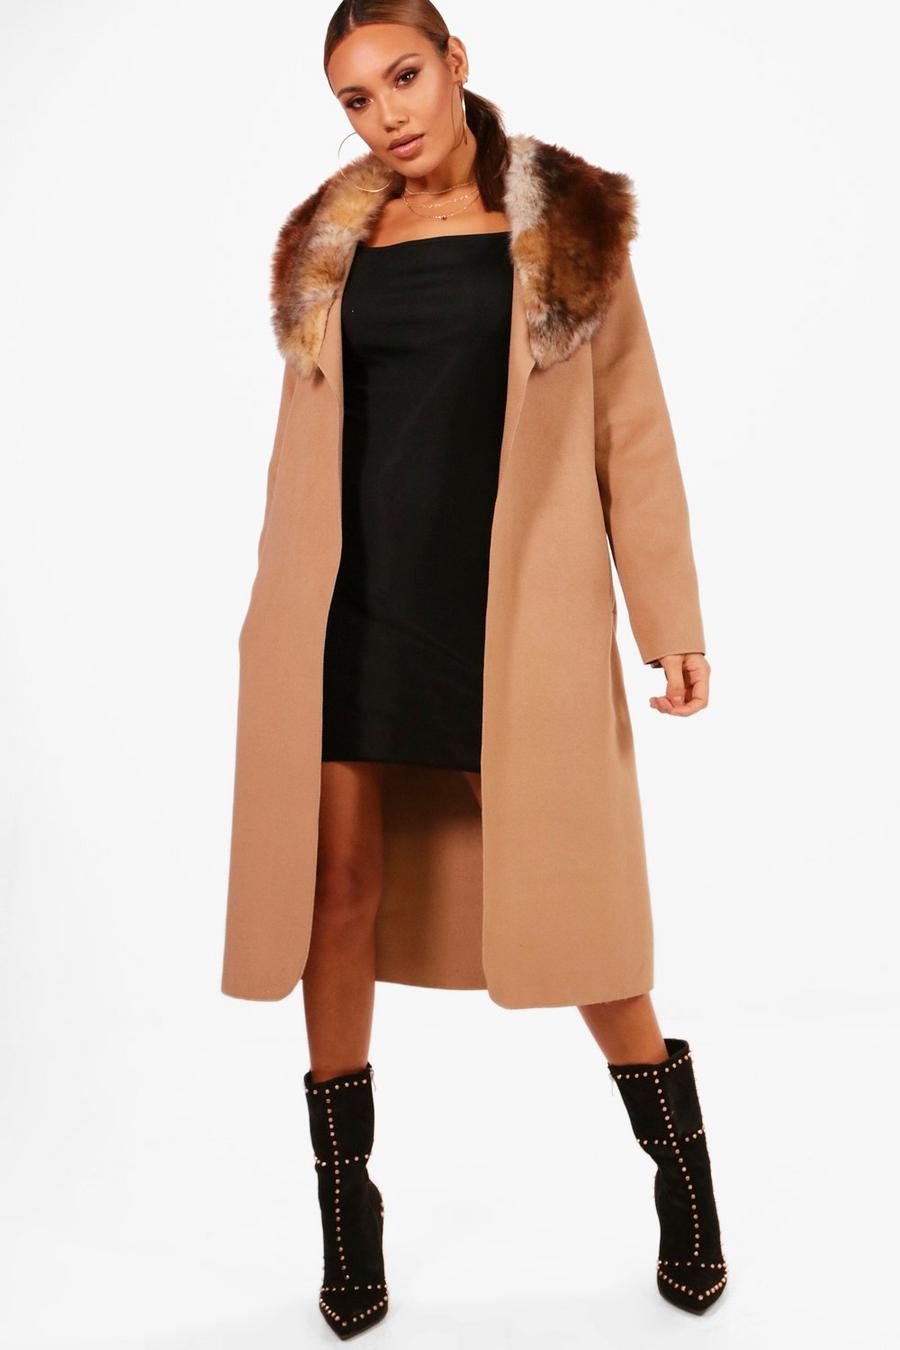 Chicwish Delicate Button Trim Faux Fur Knit Coat in Camel Brown S-M